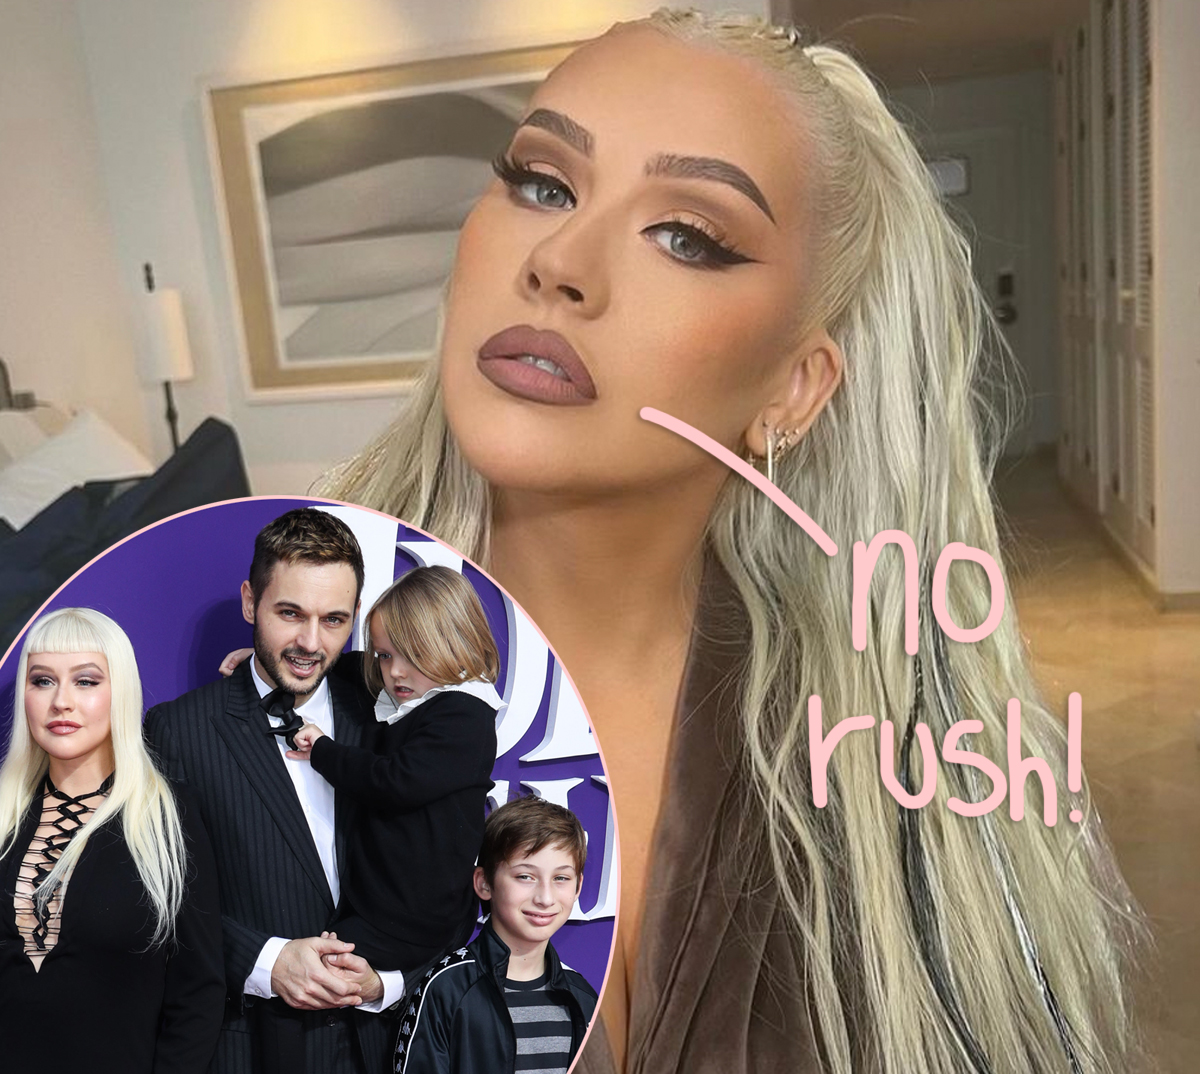 #Christina Aguilera & Matthew Rutler Have ‘No Plans’ To Wed After 8-Year Engagement — Here’s Why!